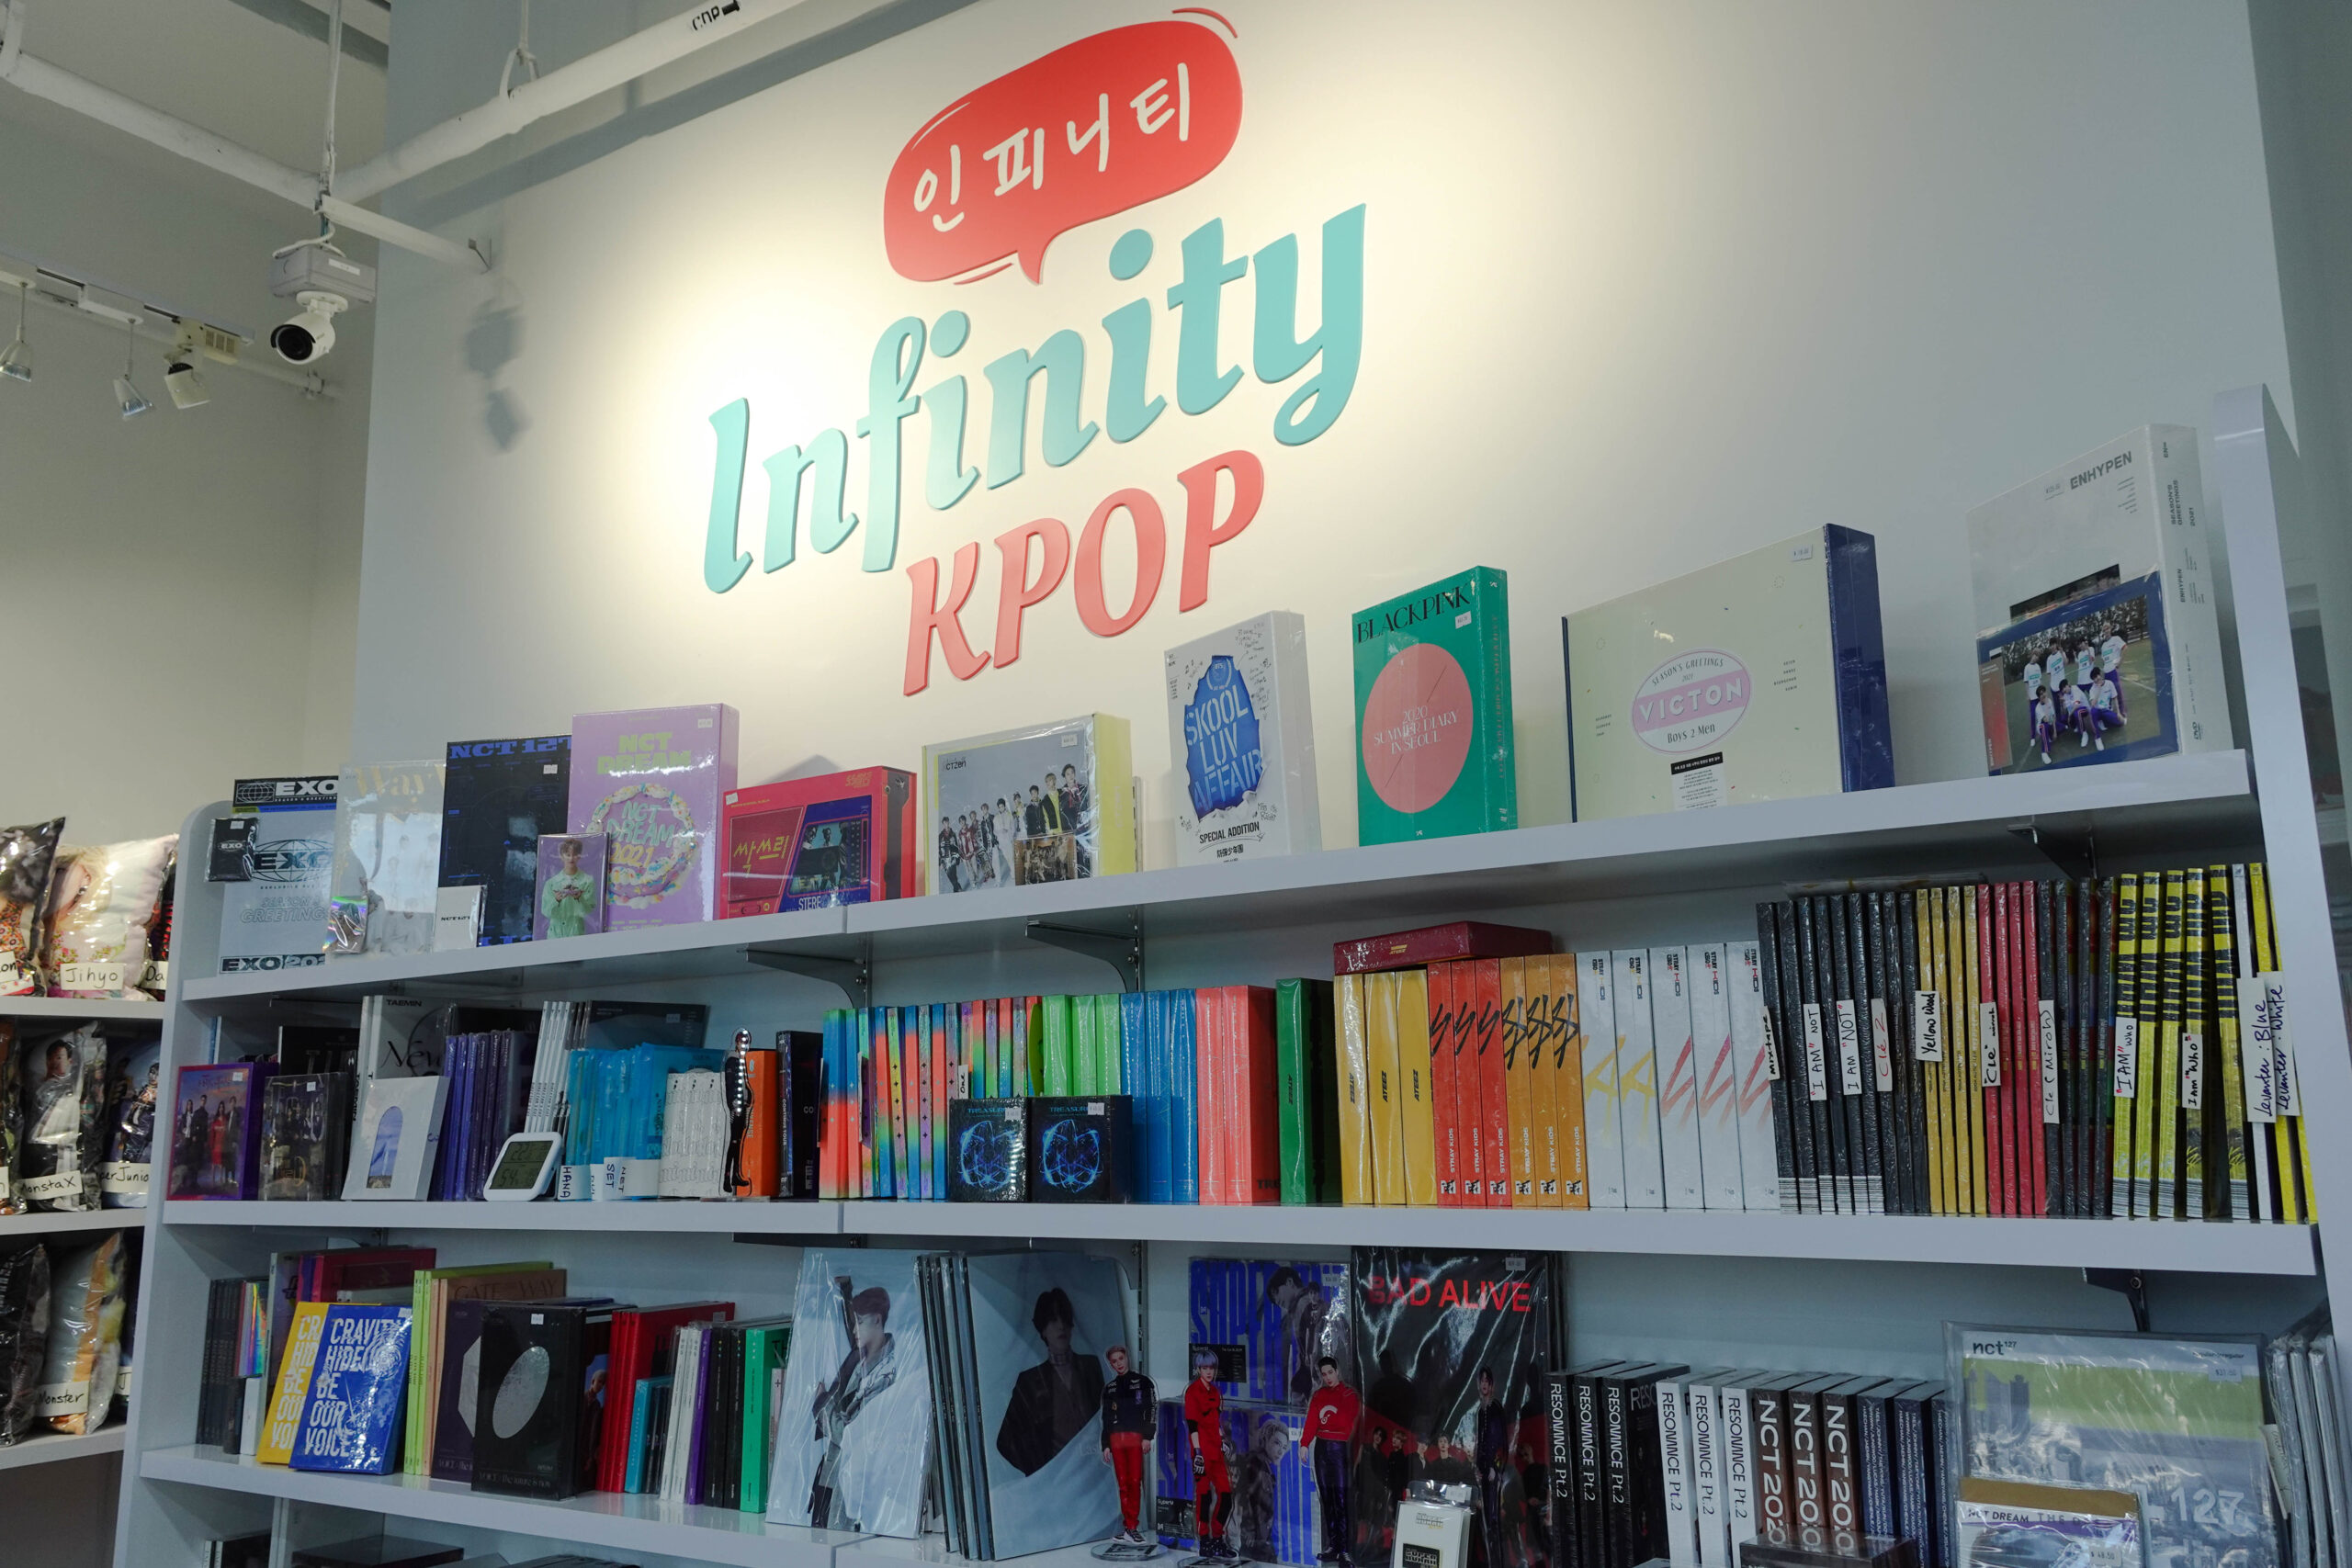 A dedicated shop for K-Pop Albums & Merchandise in Singapore - Infinity KPOP